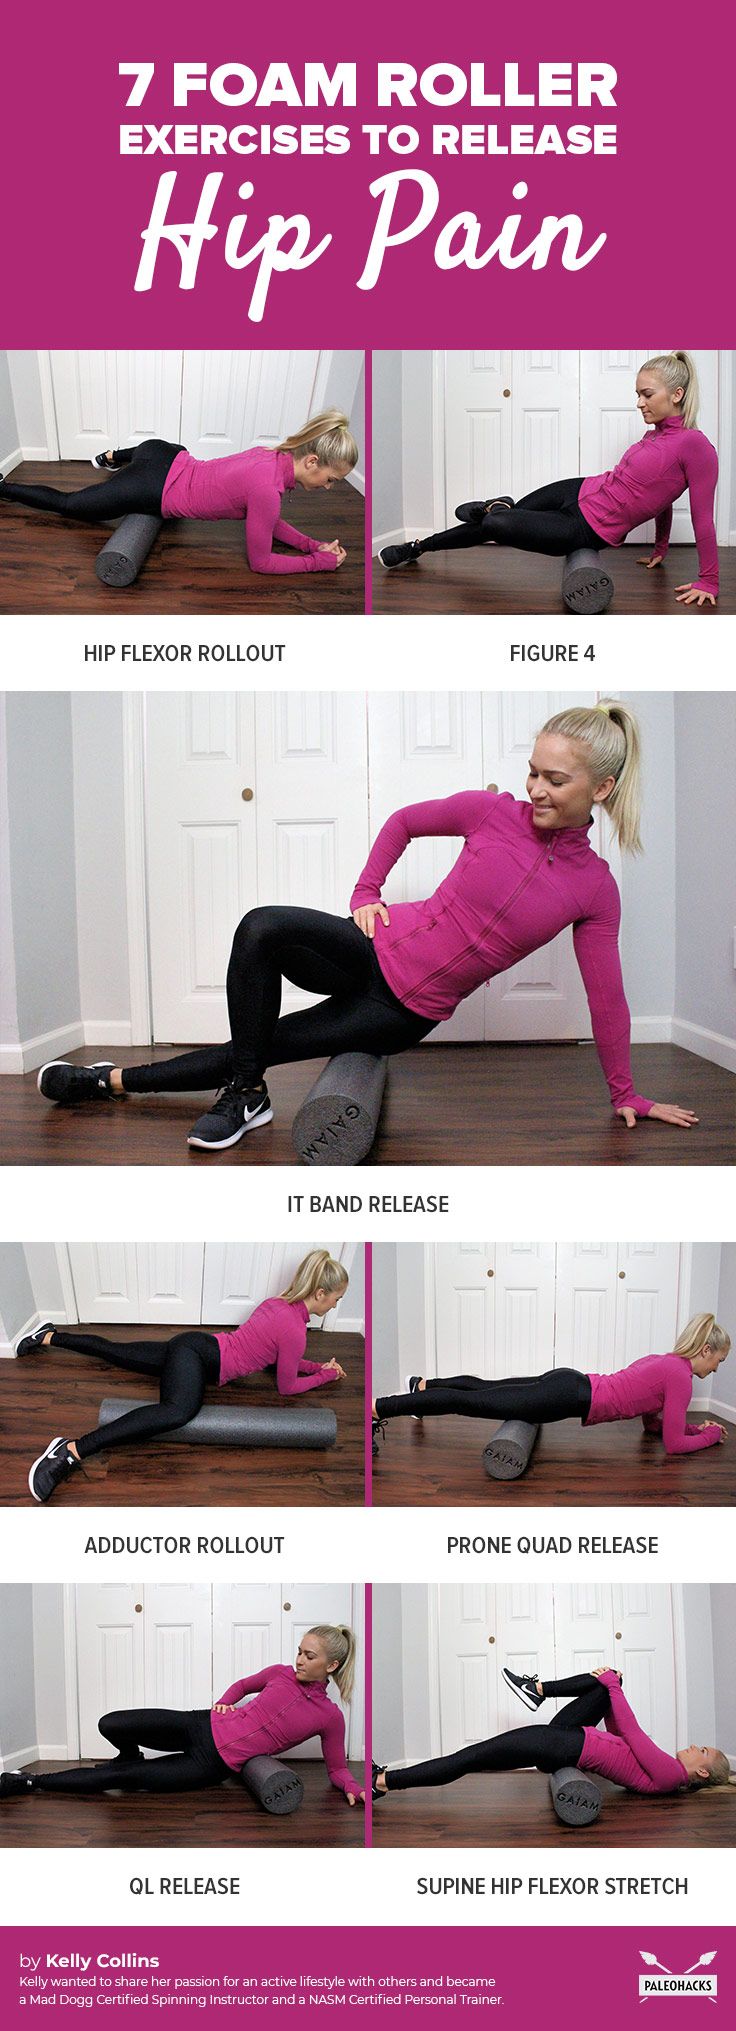 Grab a foam roller and use the following routine to relieve your hip pain quickly and easily.